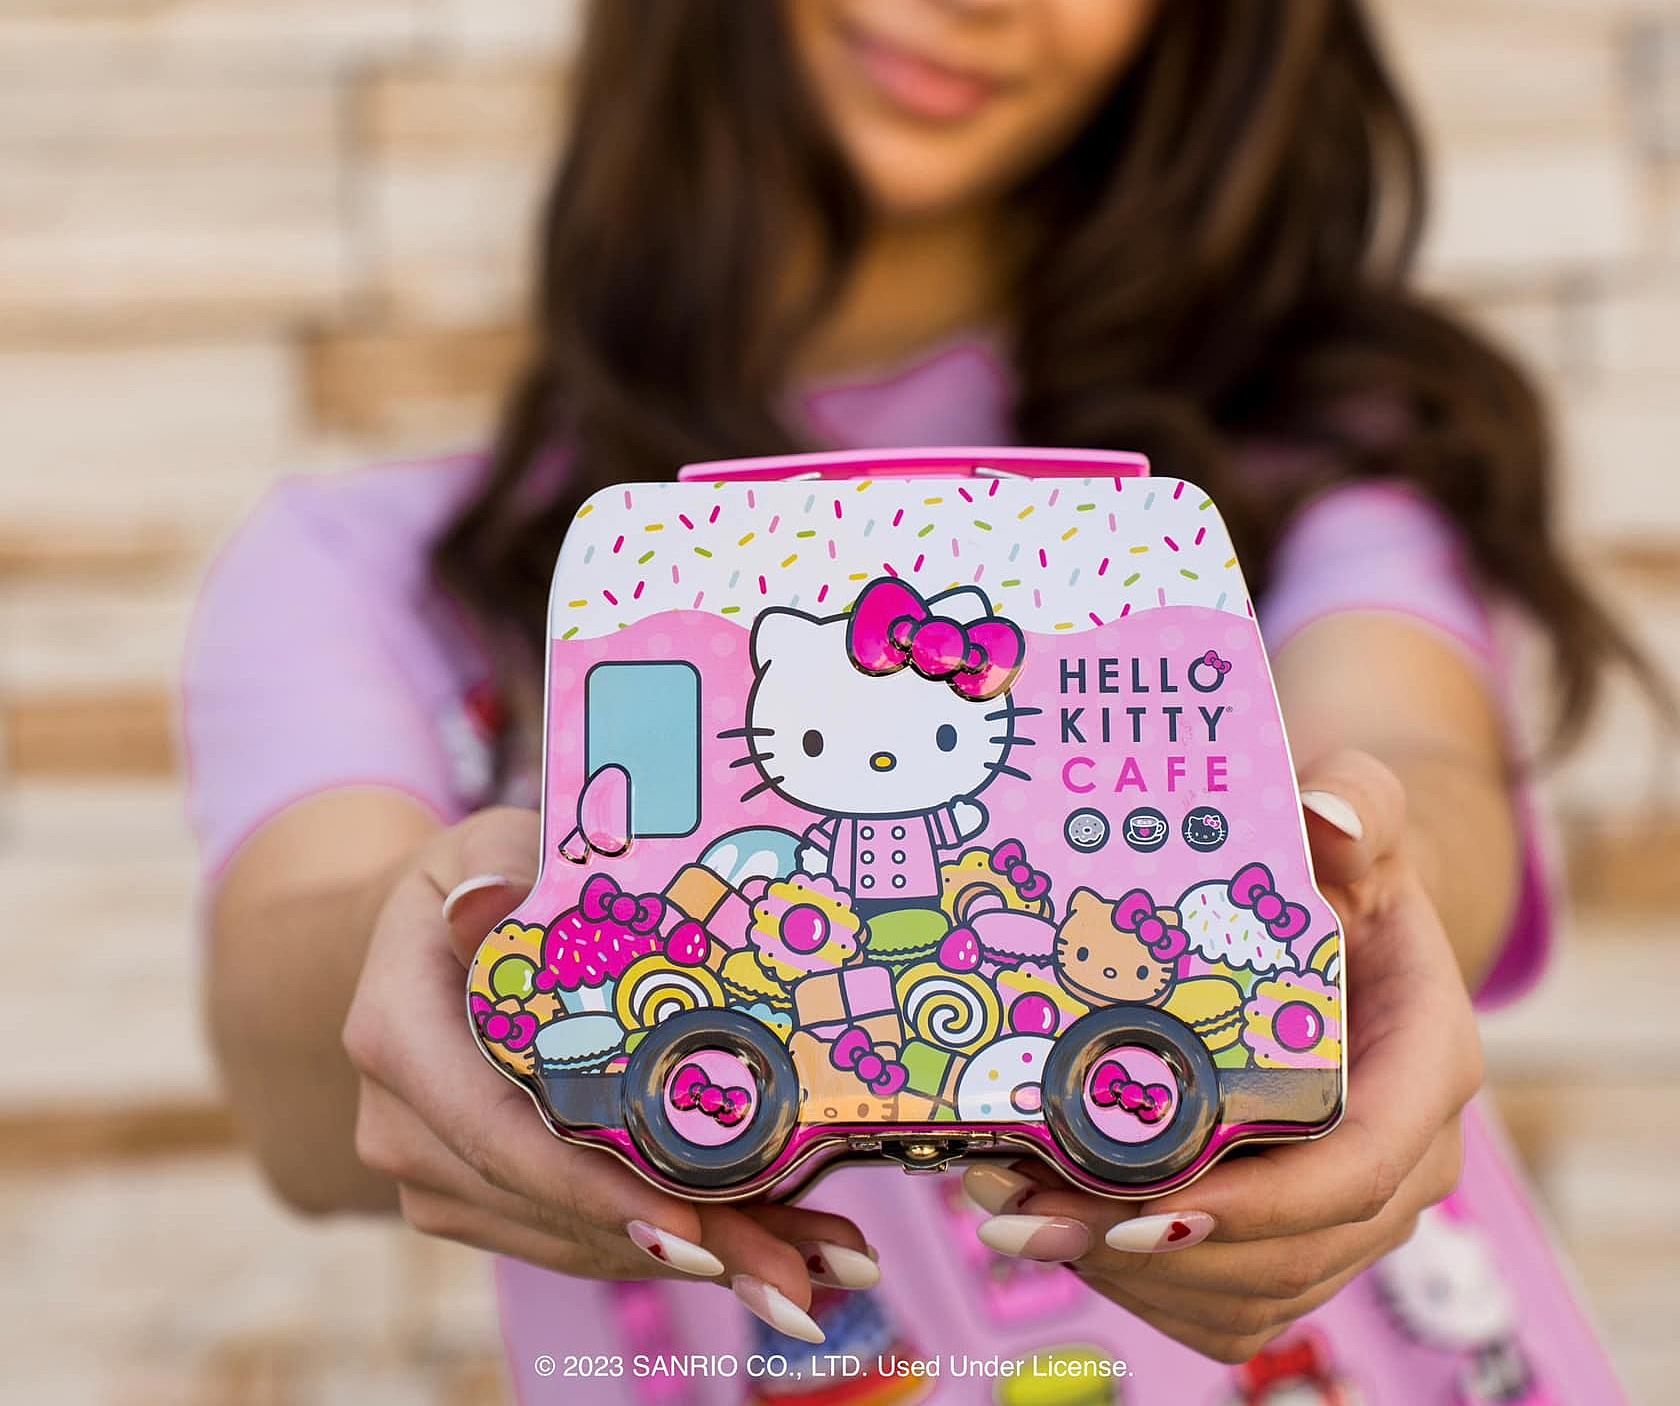 Hello Kitty Cafe Las Vegas - Looking for some extra flair? Take